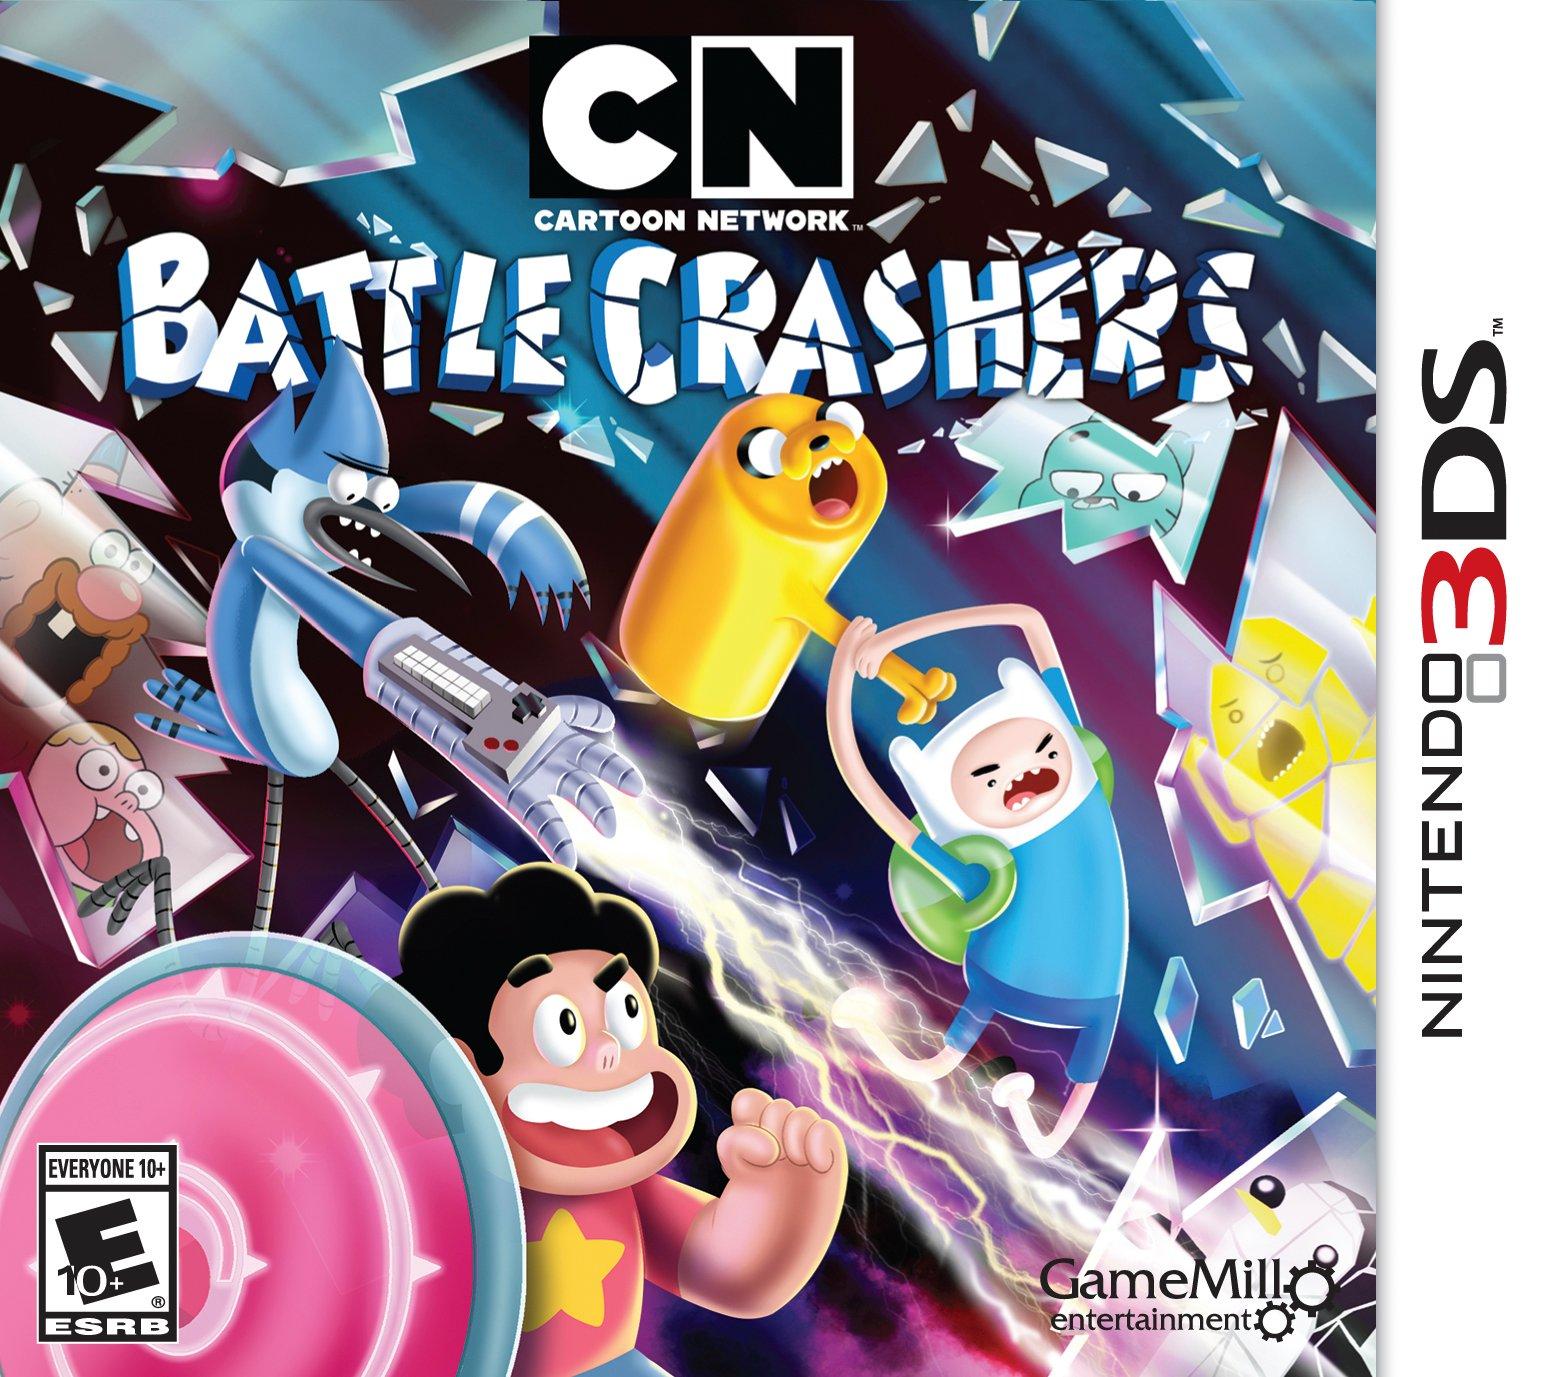 CartoonNetworkPR on X: Game ON! Cartoon Network Arcade is now